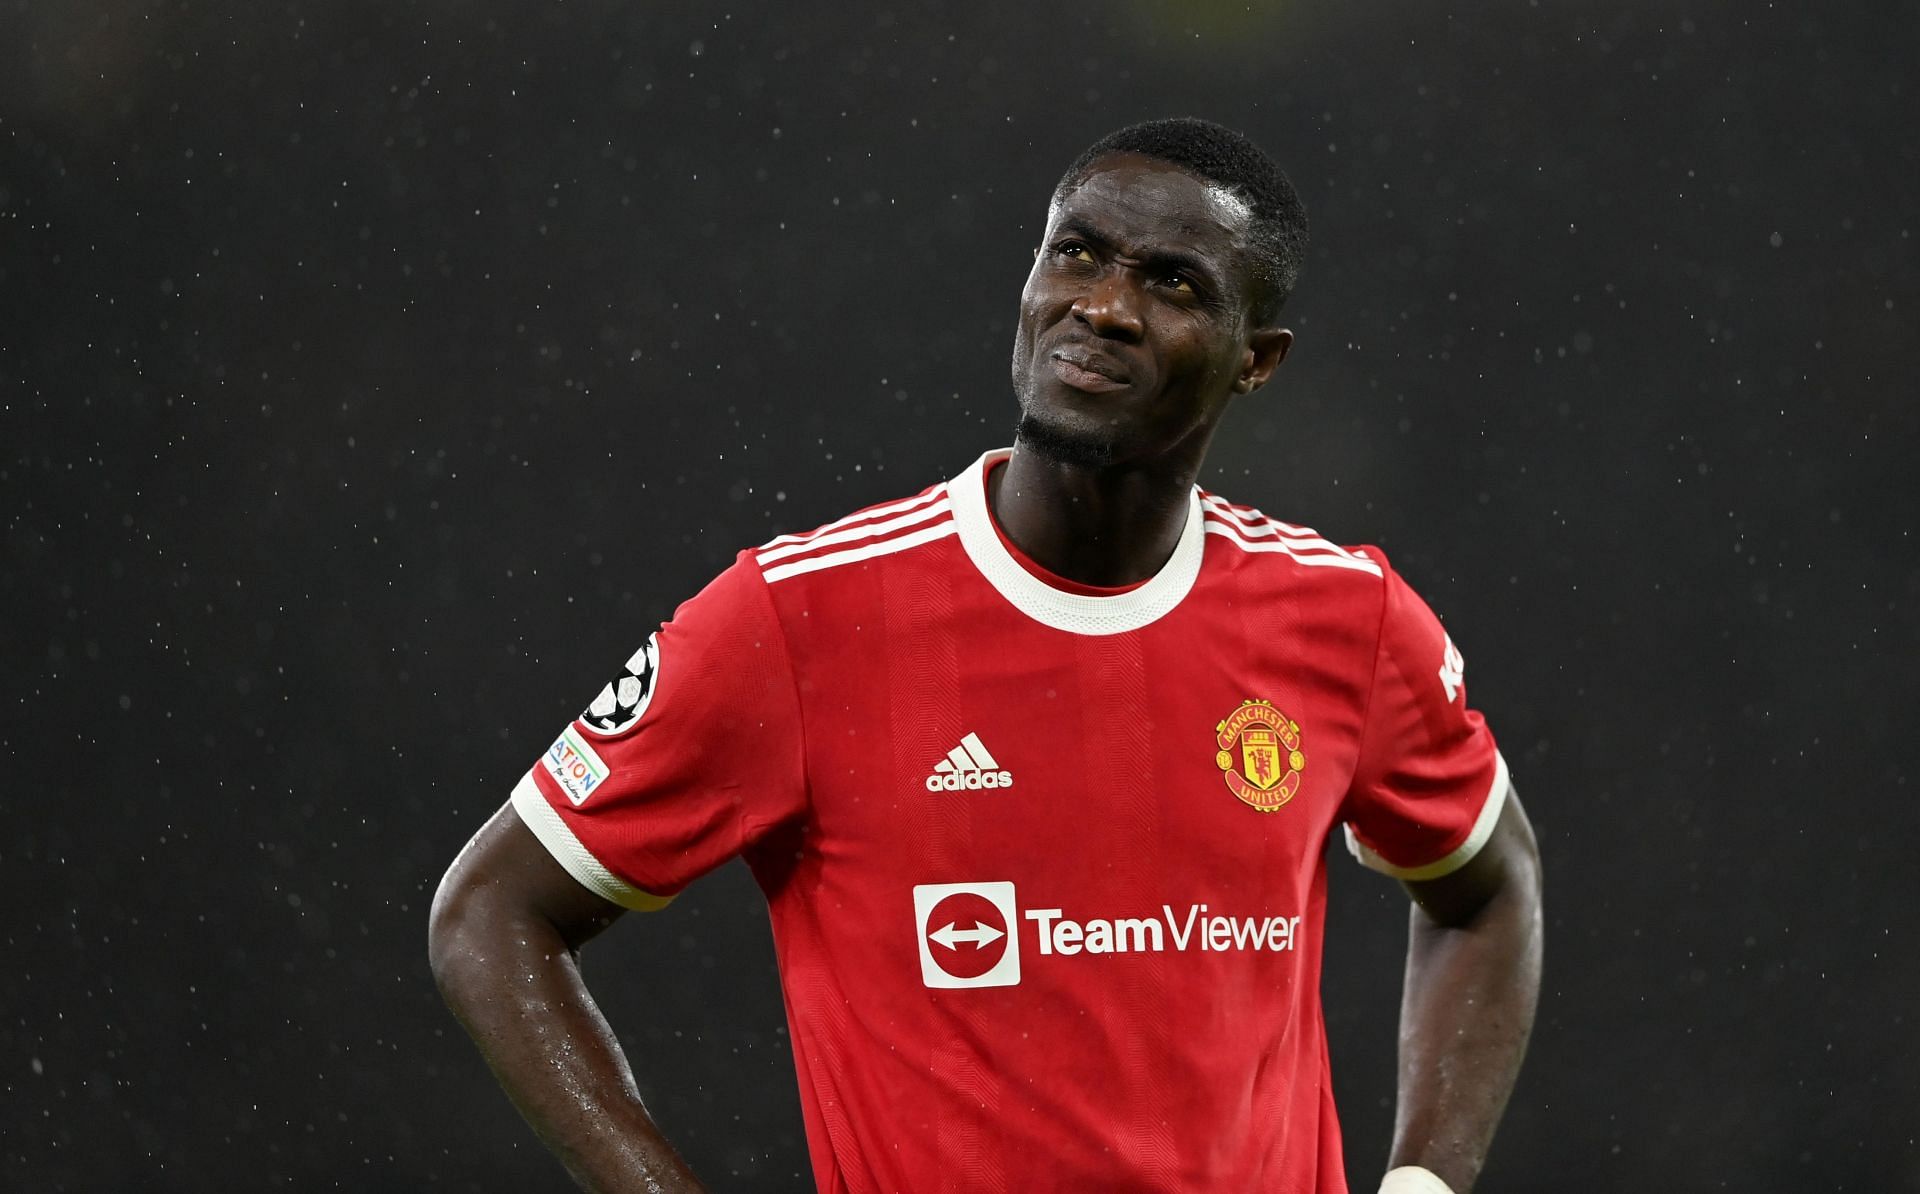 Eric Bailly struggled with injuries during his time at Manchester United.